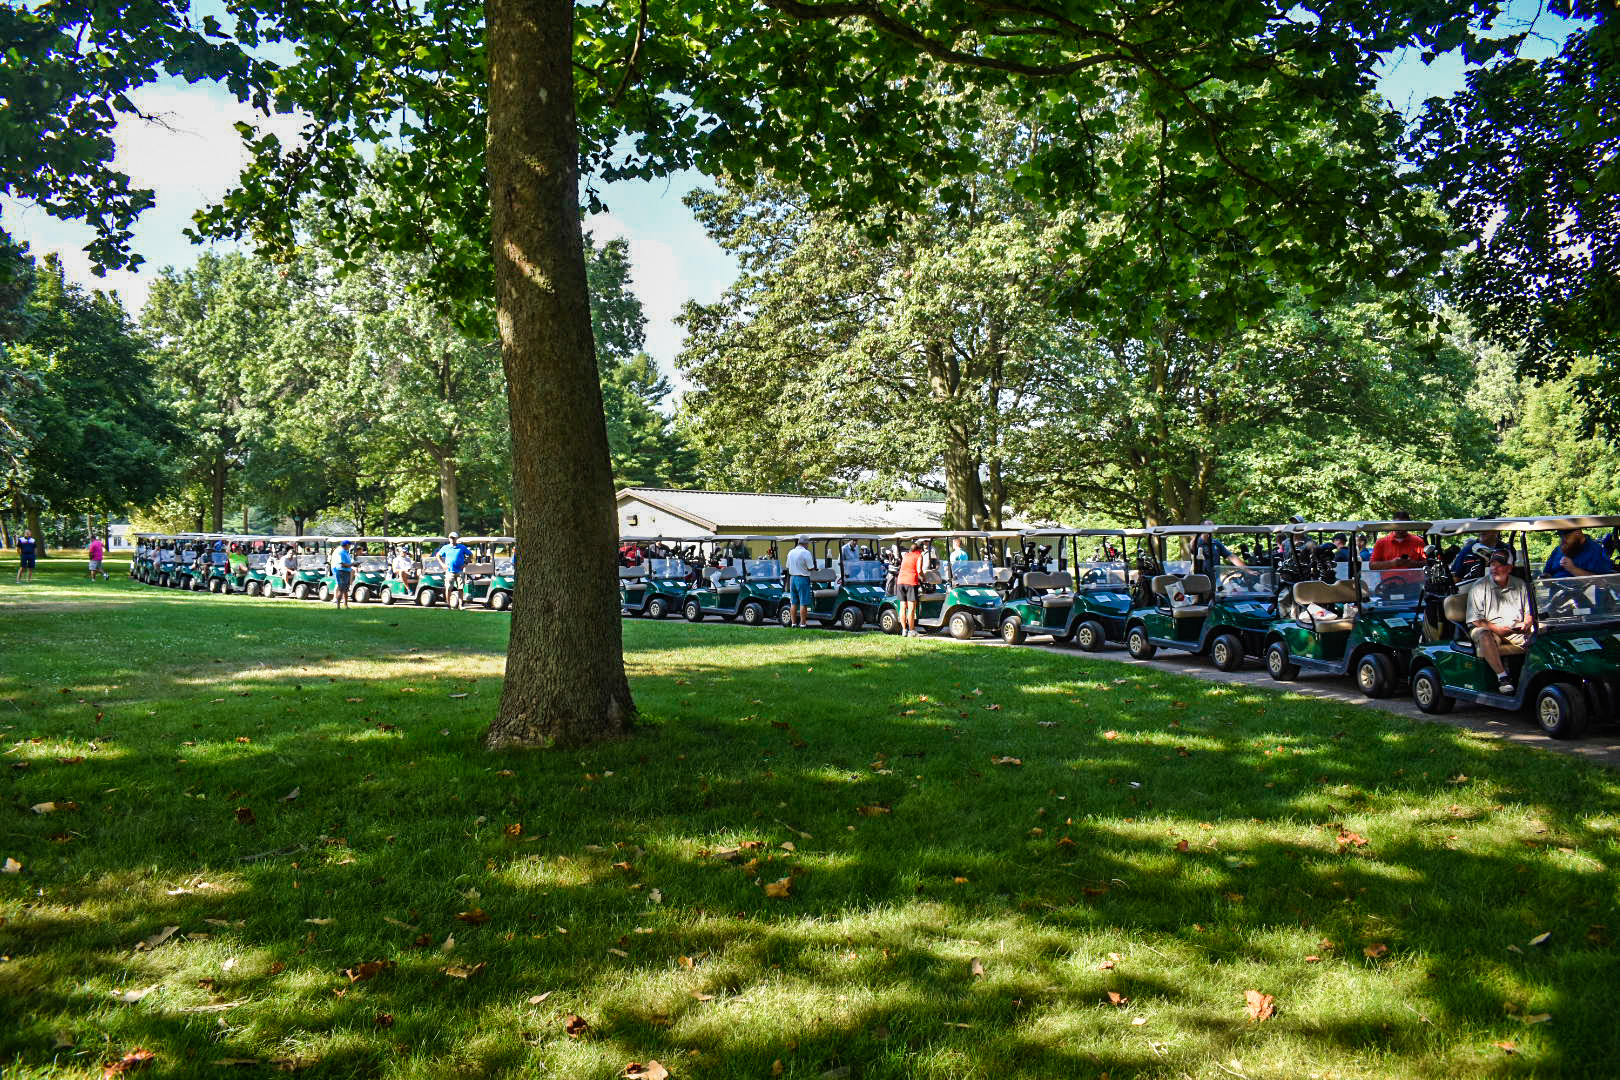 The 27 th Annual Golf Outing was a great success!